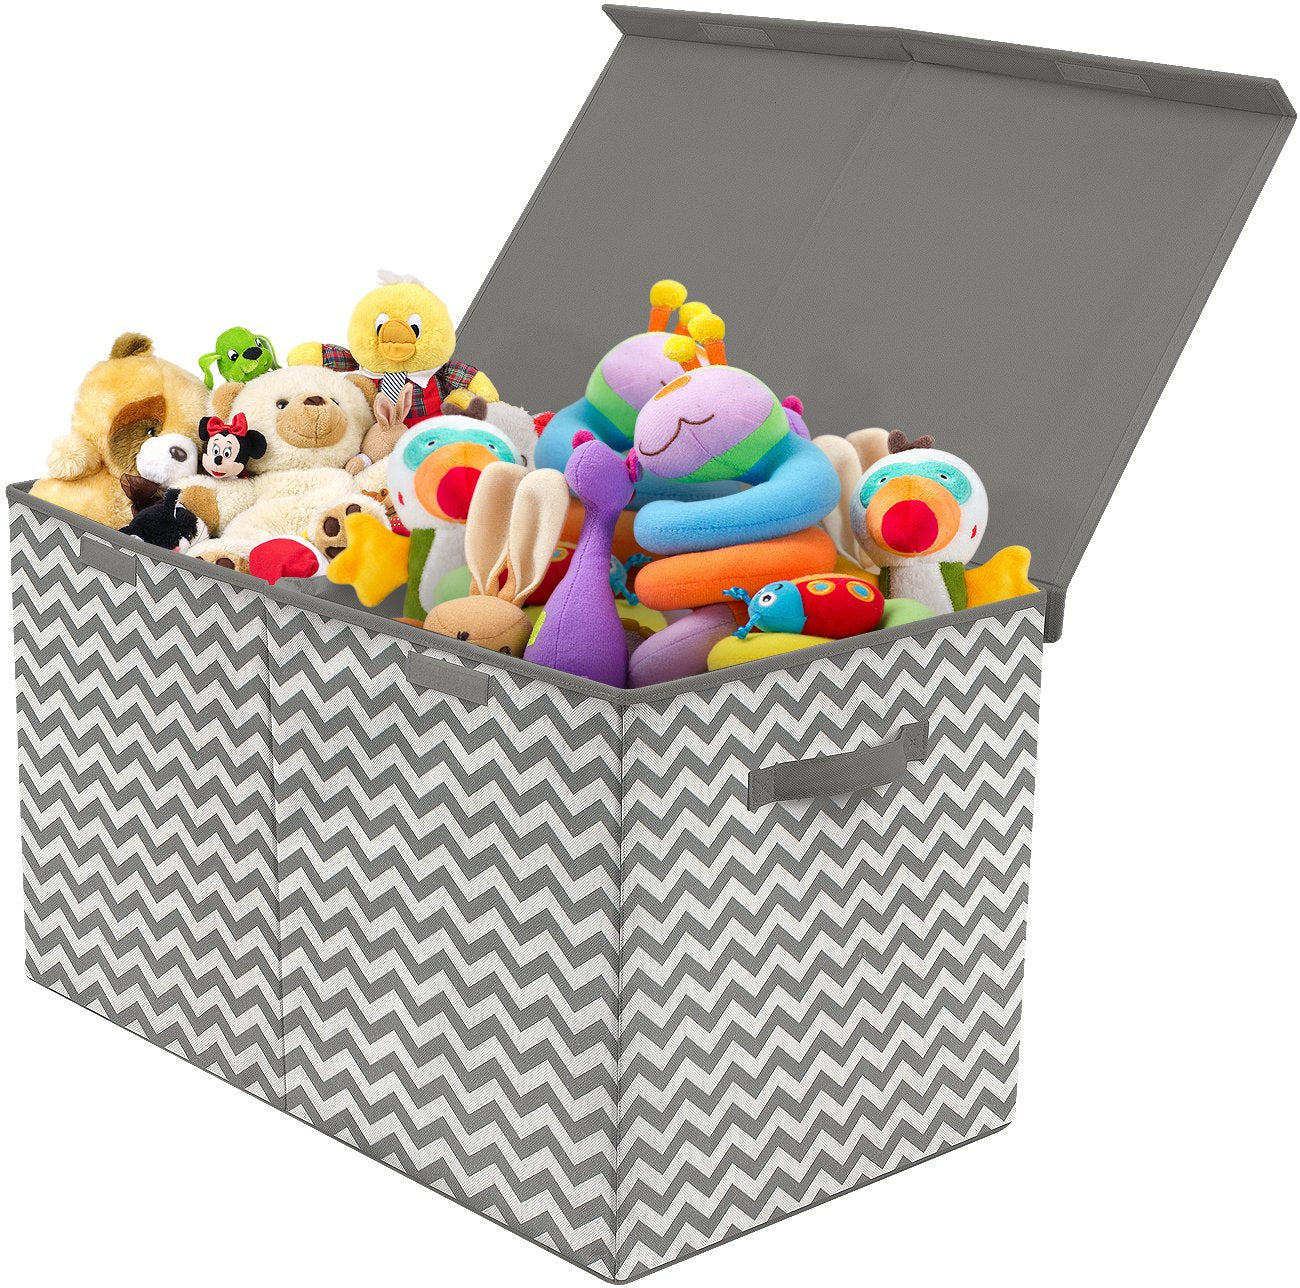 Sorbus Toy Chest with Flip-Top Lid, Kids Collapsible Storage for Nursery, Playroom, Closet, Home Organization, Large (Pattern - Chevron Gray)